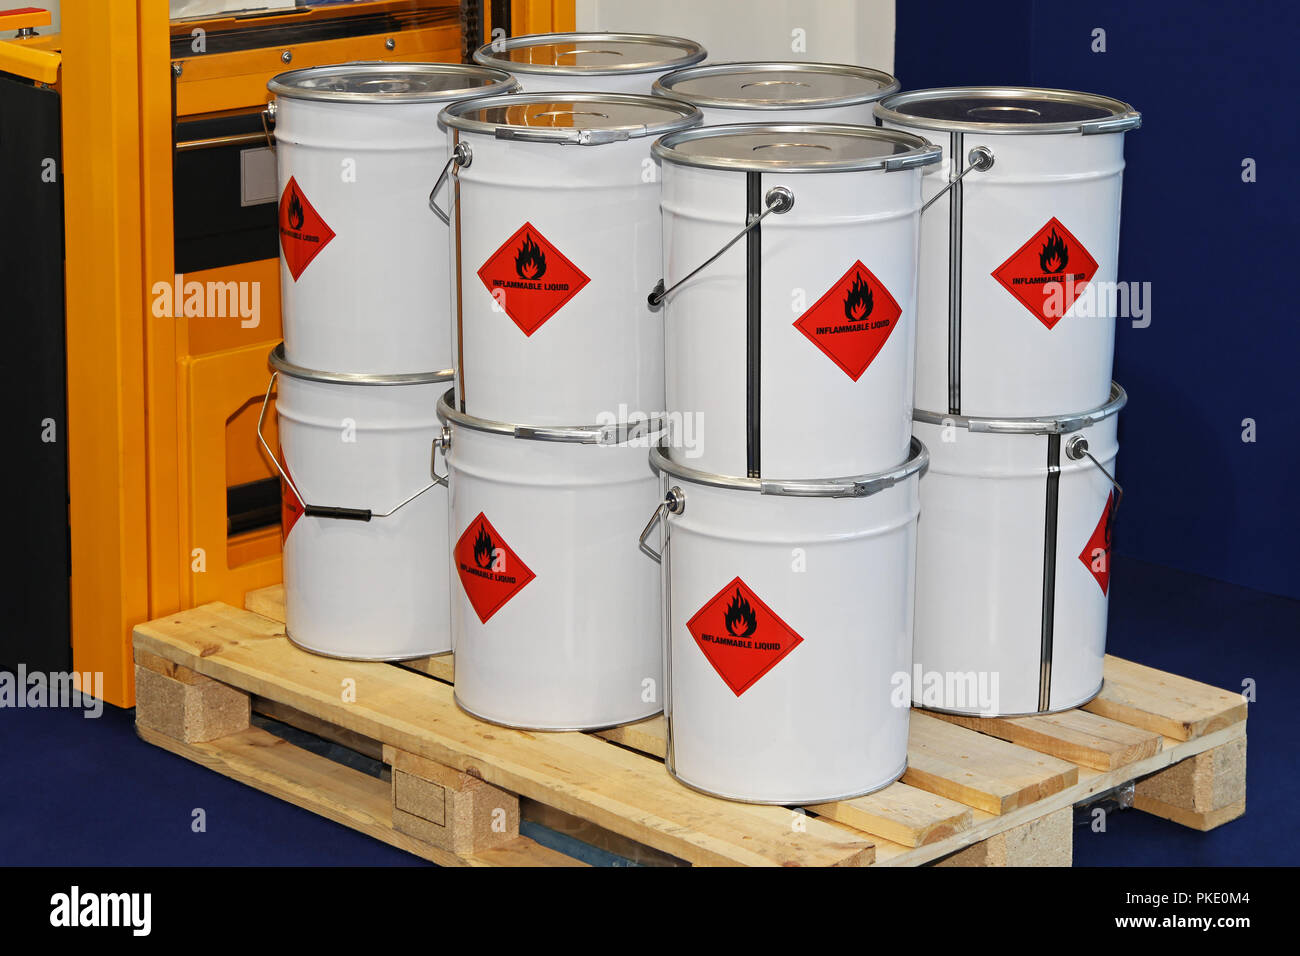 Flammable liquid in containers at pallet forklift Stock Photo